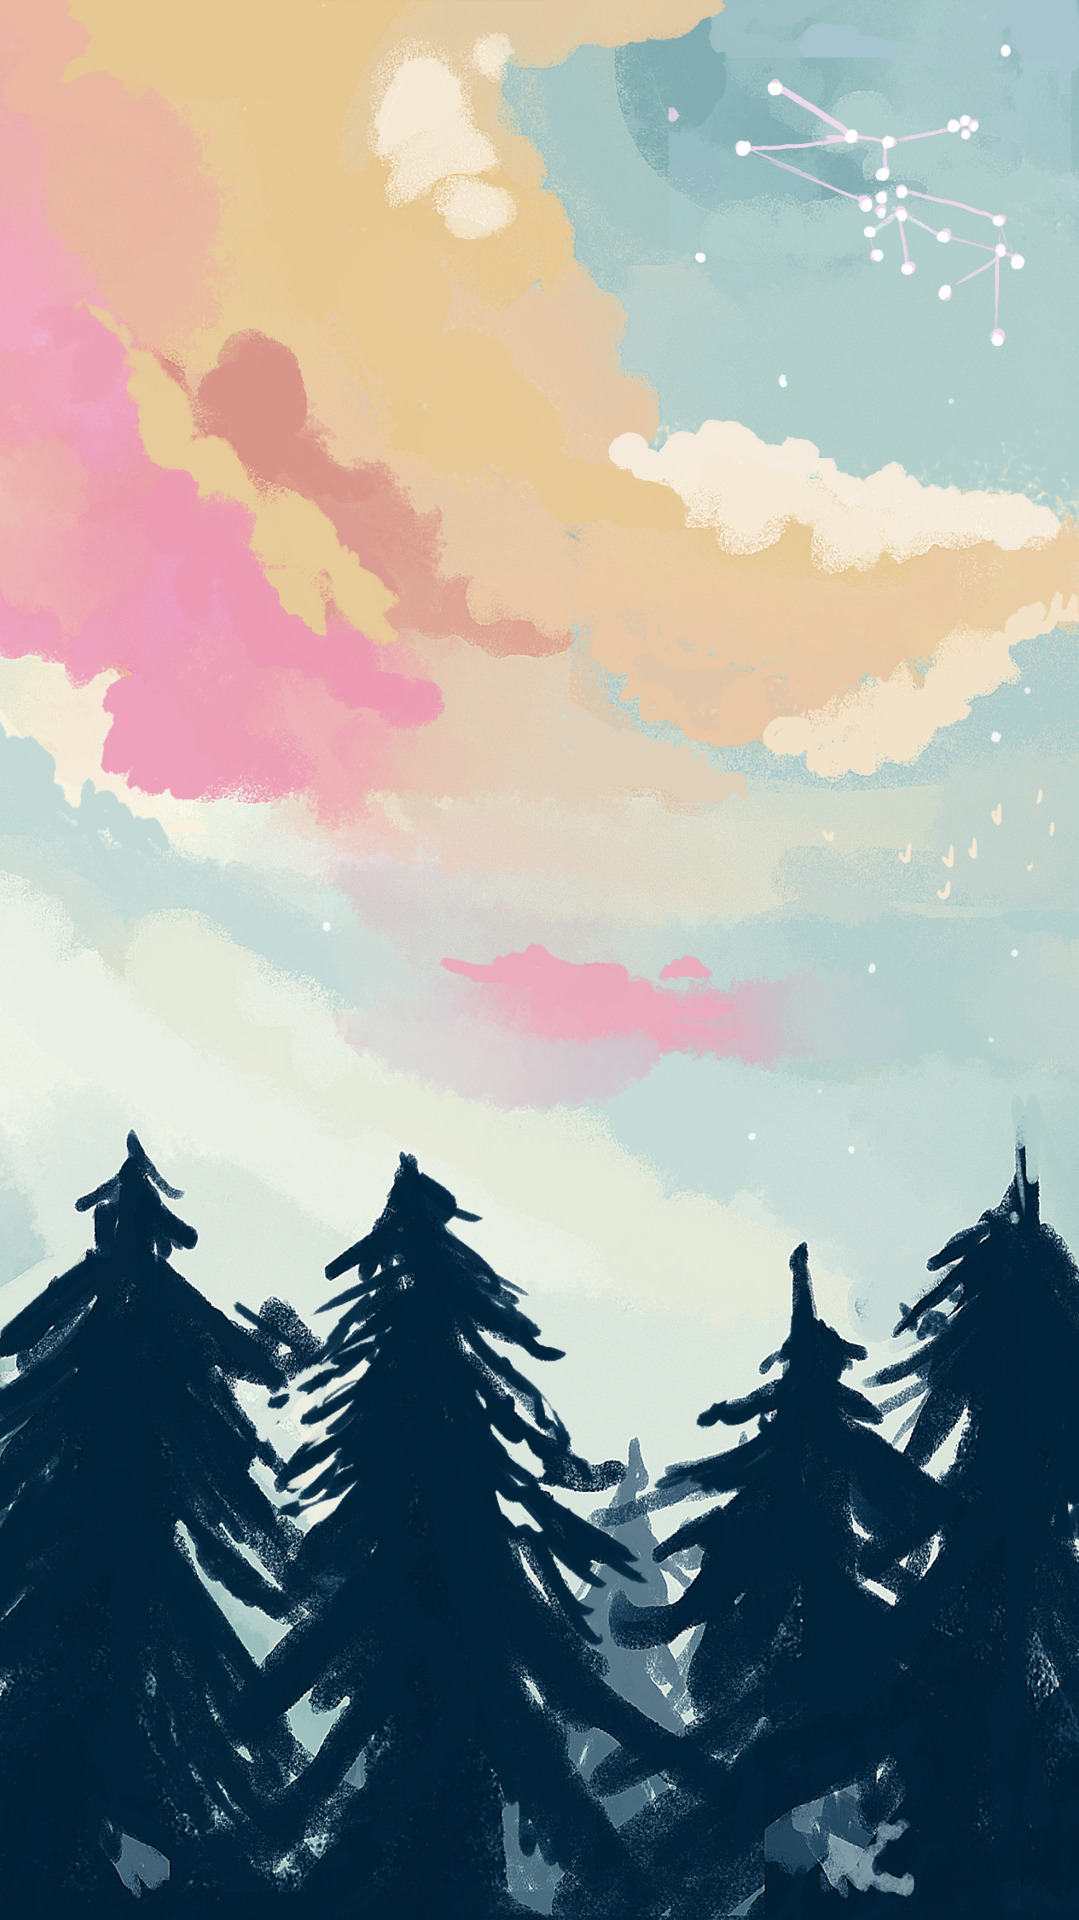 30 + Best Collection Of Tumblr Backgrounds